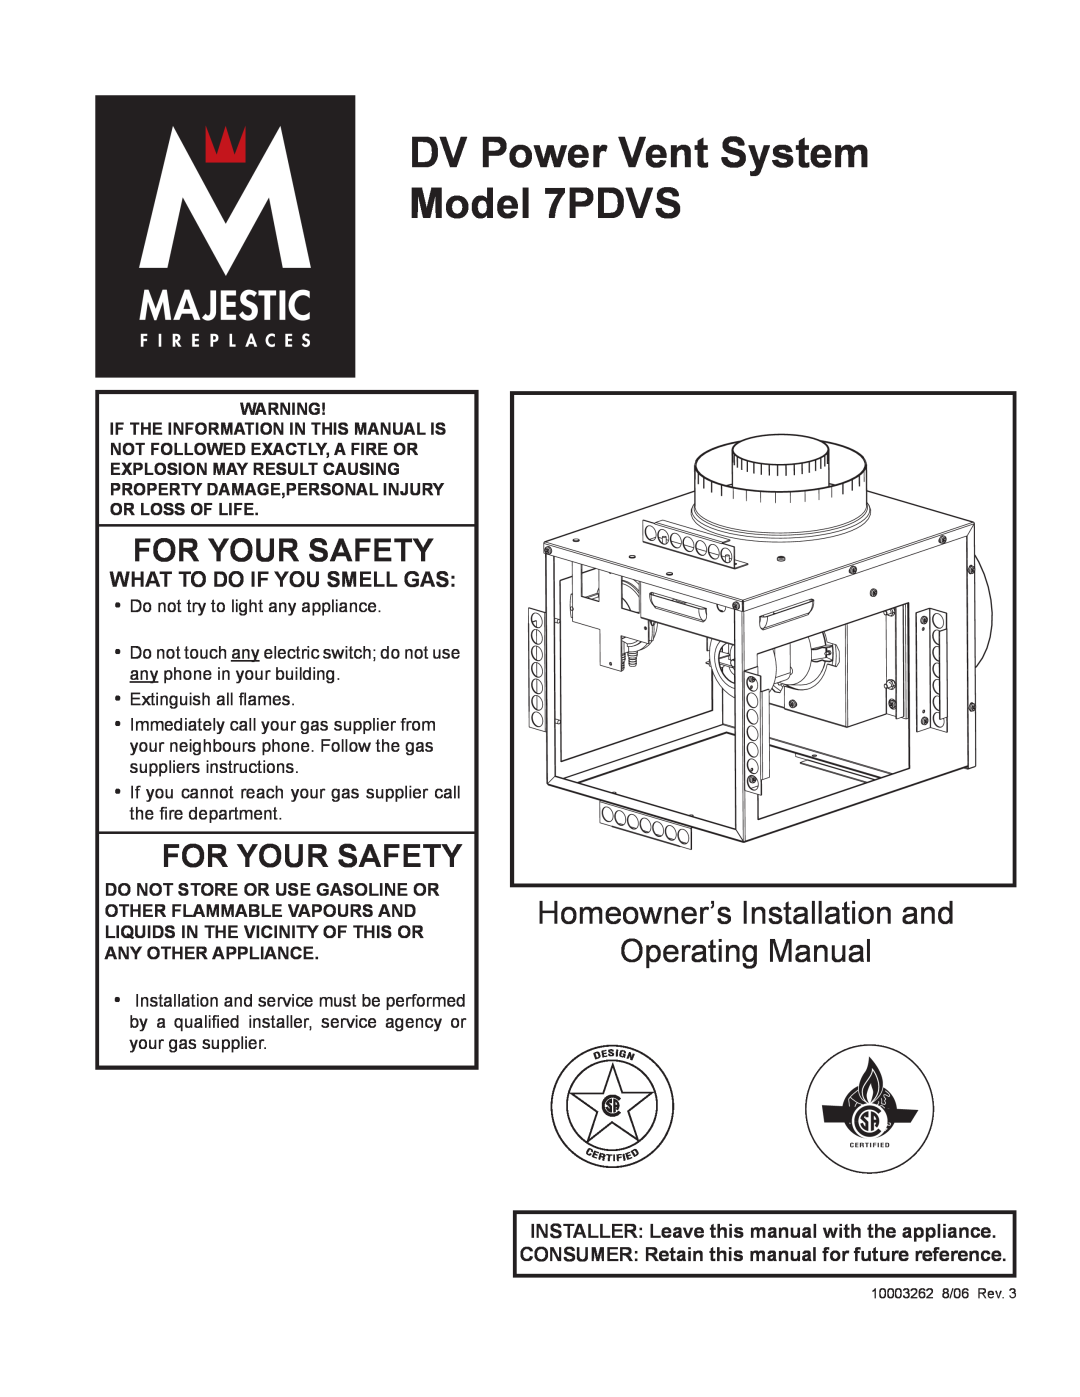 Vermont Casting manual DV Power Vent System Model 7PDVS, For Your Safety, Homeowner’s Installation and Operating Manual 